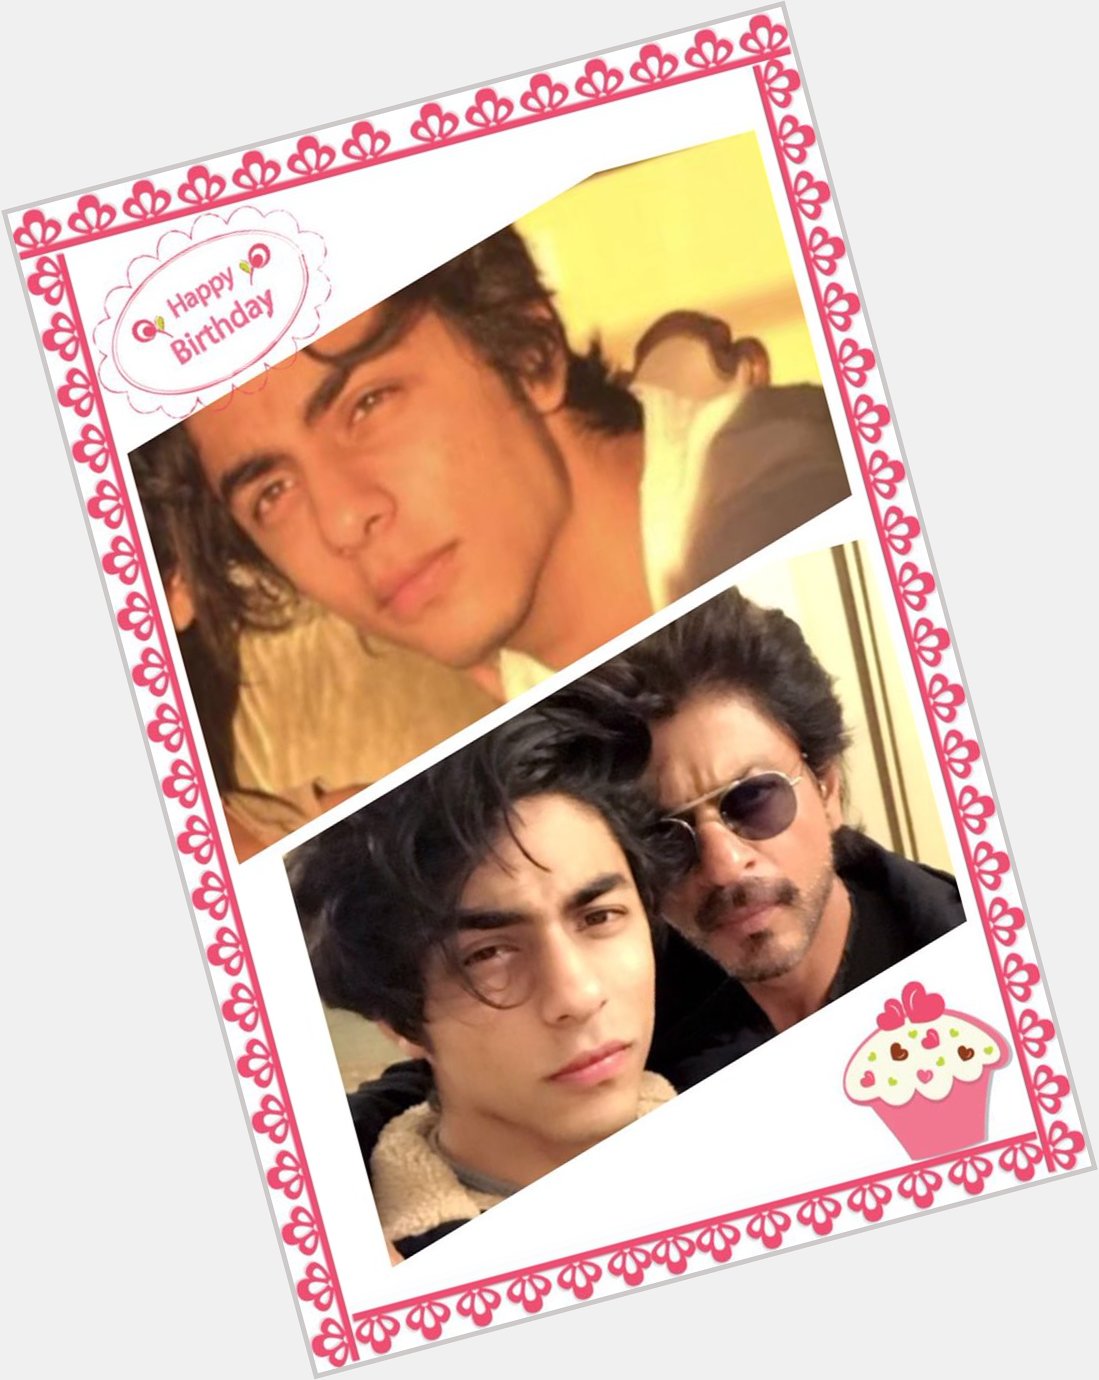 Happy Birthday Dear, Aryan khan
May all ur wishes and dreams come true      